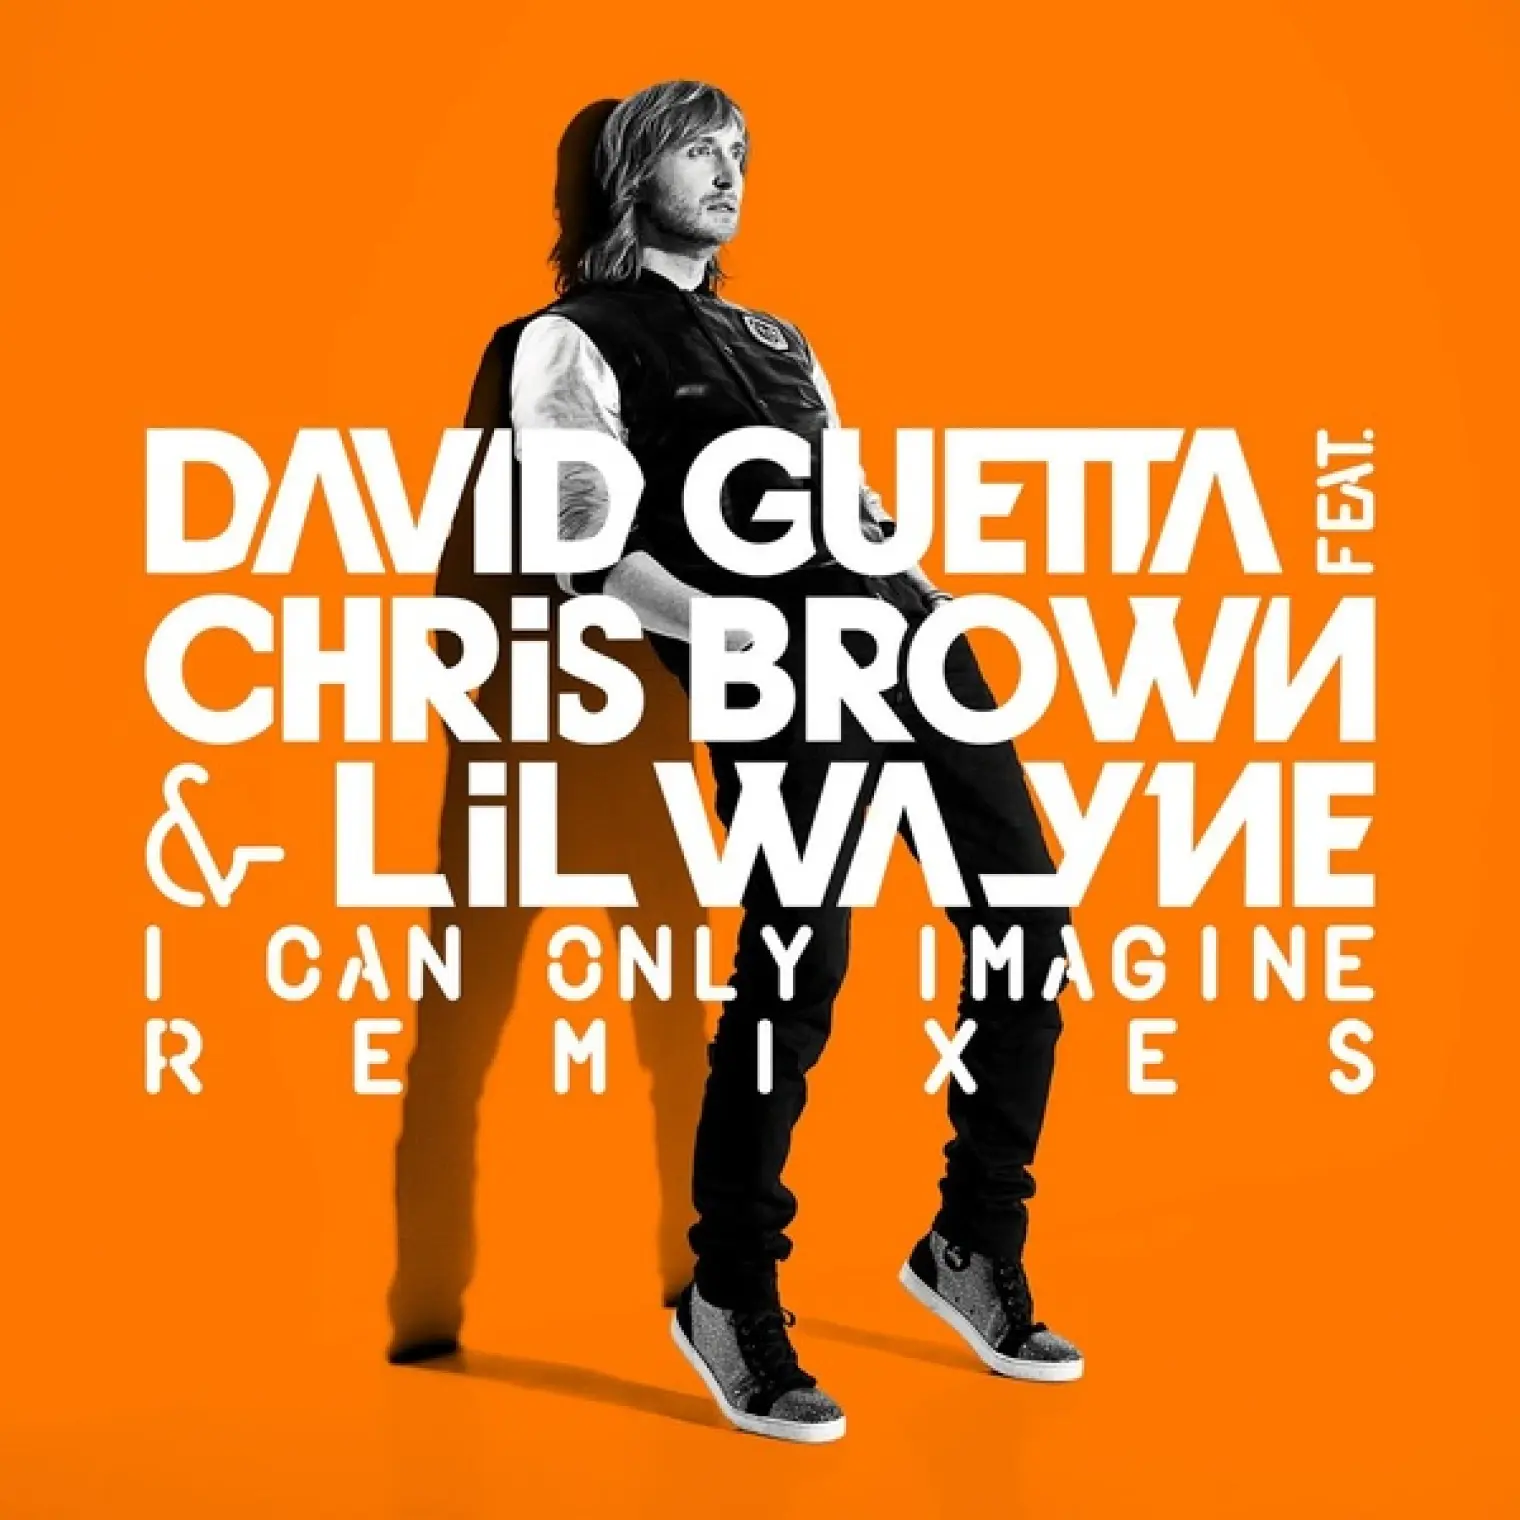 I Can Only Imagine (feat. Chris Brown and Lil Wayne) -  David Guetta 